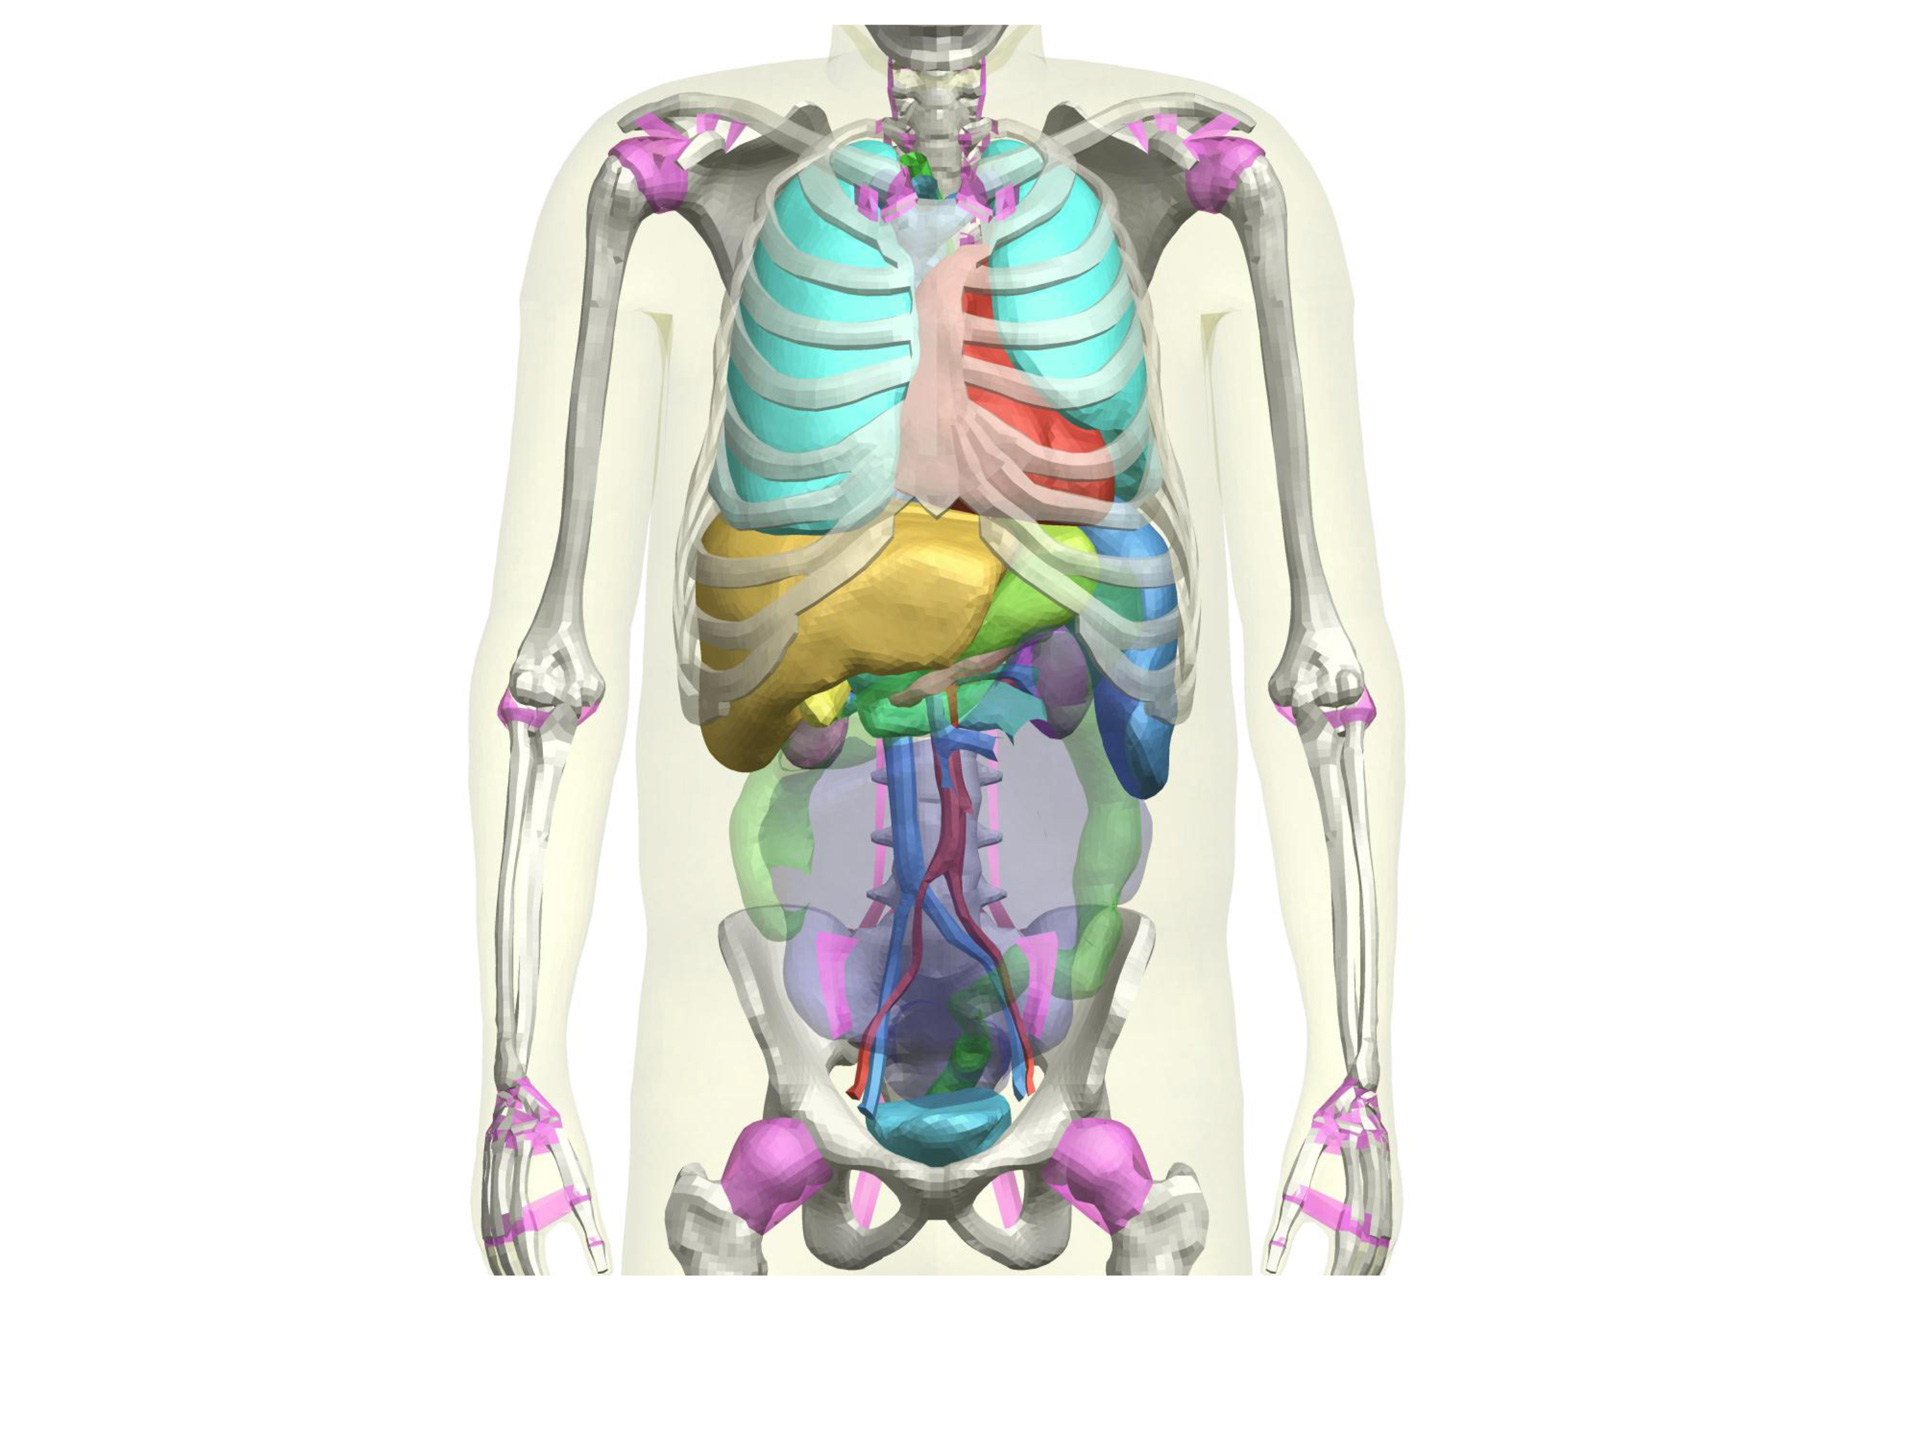 THUMS Version 4 Internal Organs of Adult Male | Toyota Motor ...